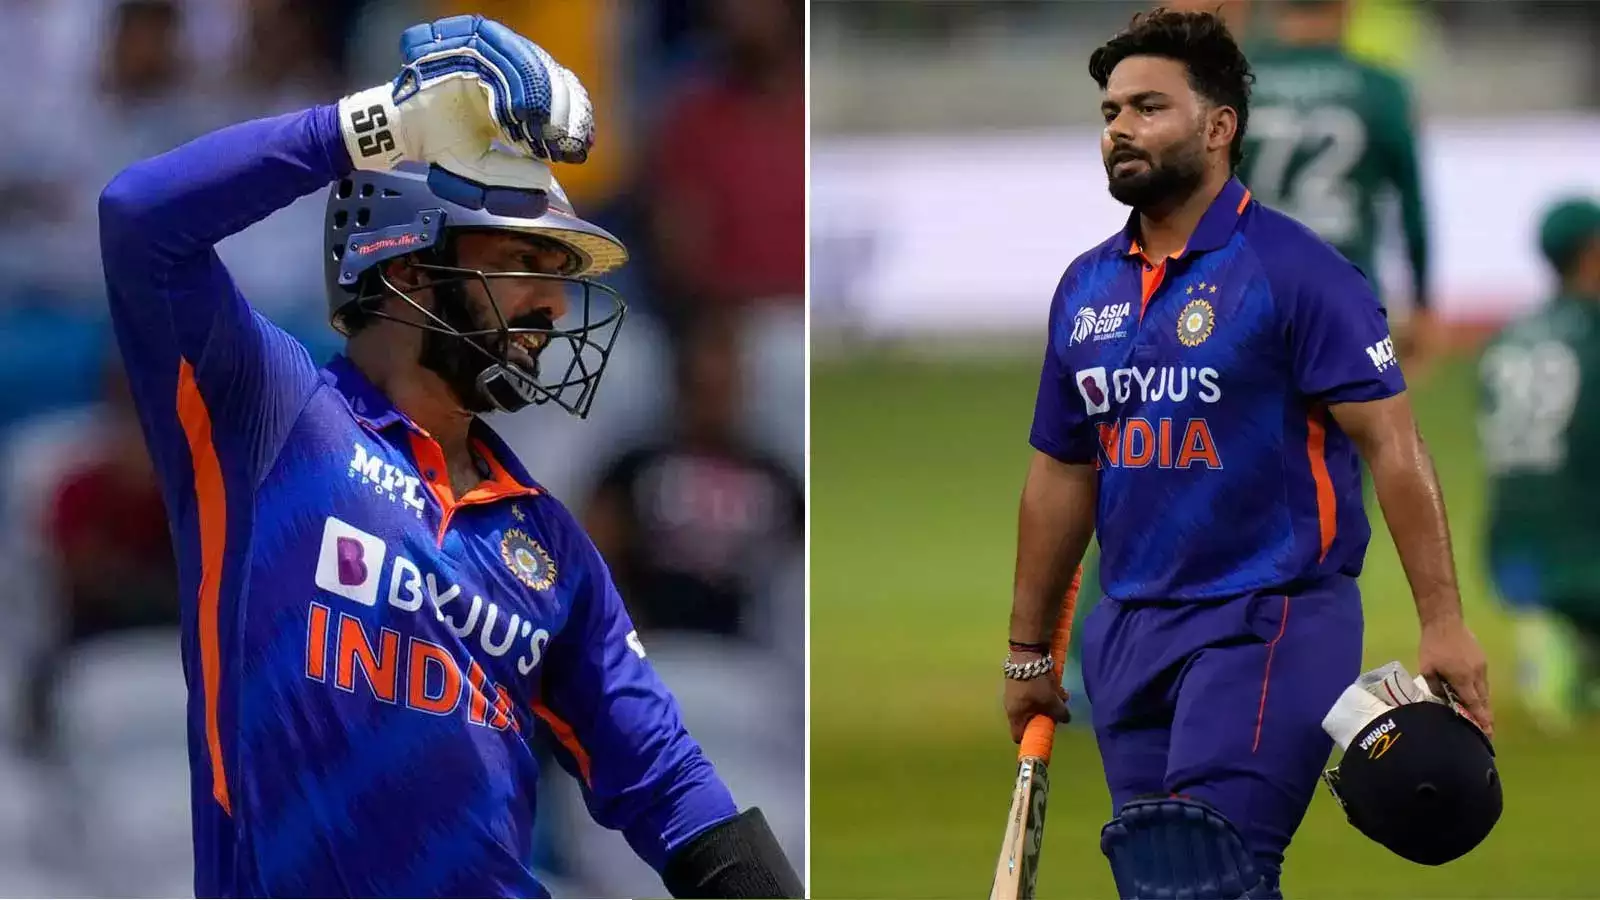 Rishabh Pant is always a better option than Dinesh Karthik according to Ajay Jadeja: There has been a heated discussion regarding the Indian cricketer